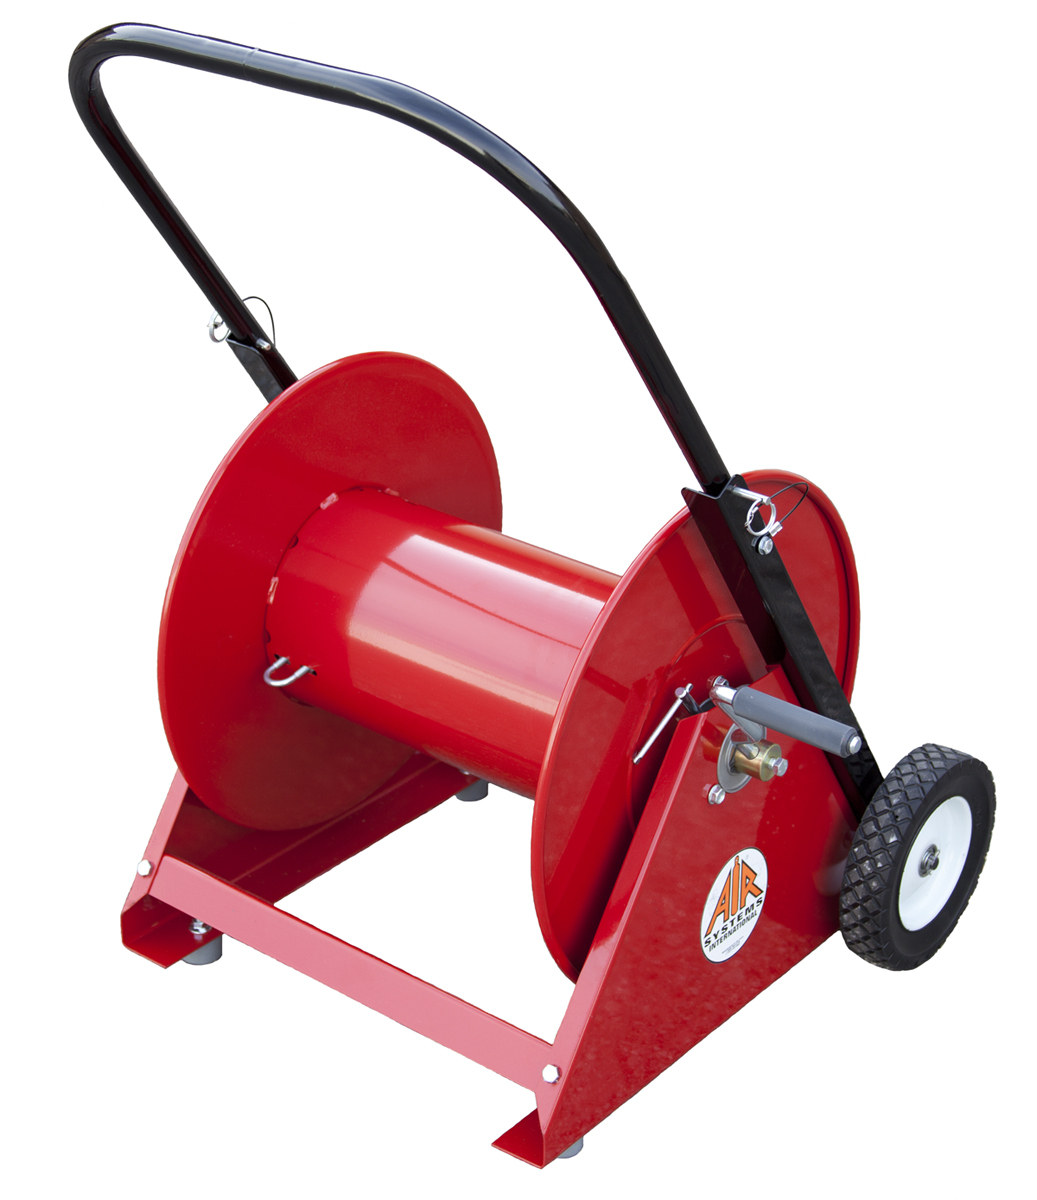 Air Systems International Air Hose Reel Cart For Supplied Air Respirator (Availability restrictions apply.)